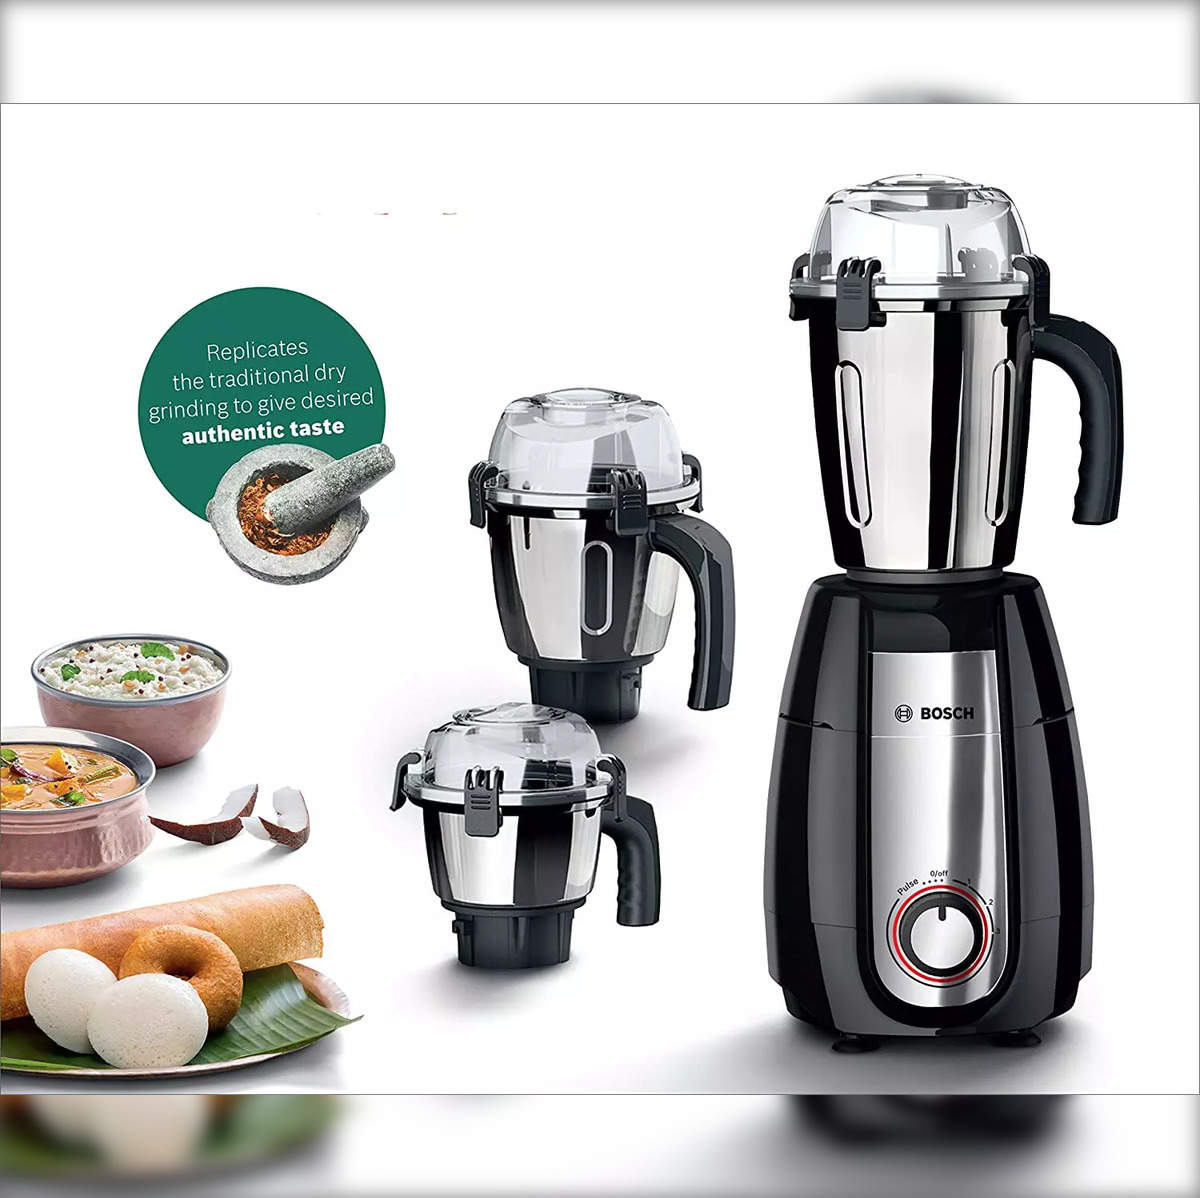 Bosch Mixer Grinders: Grind Everything Perfectly with Bosch Mixer Grinders  starting at just Rs. 4,999 - The Economic Times